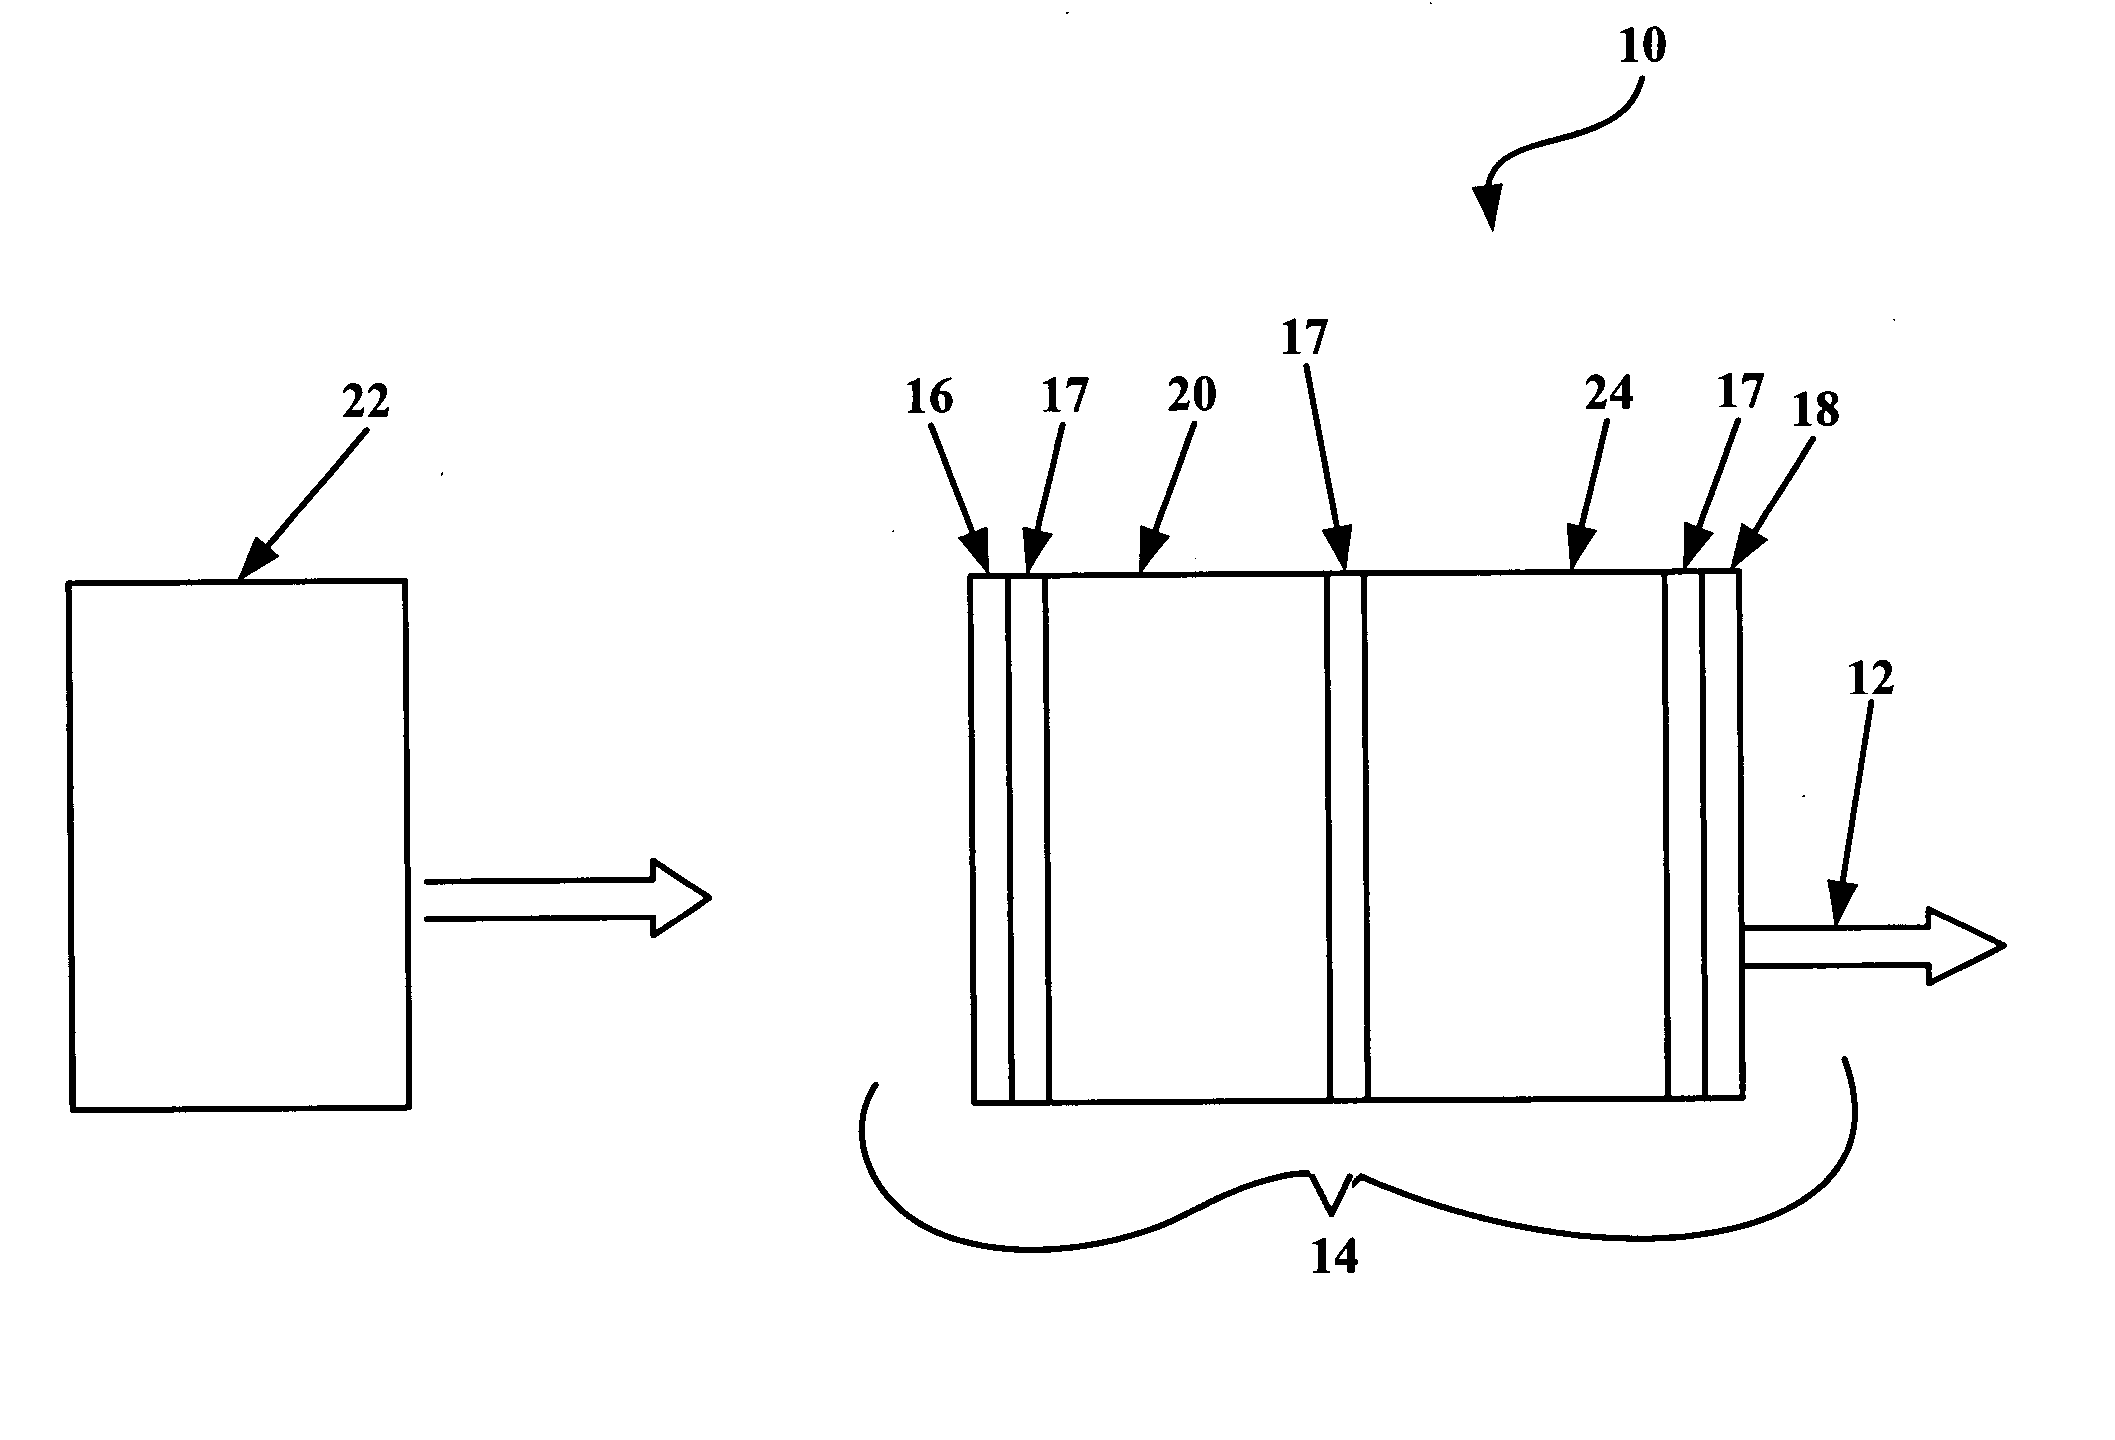 System and method for a passively Q-switched, resonantly pumped, erbium-doped crystalline laser